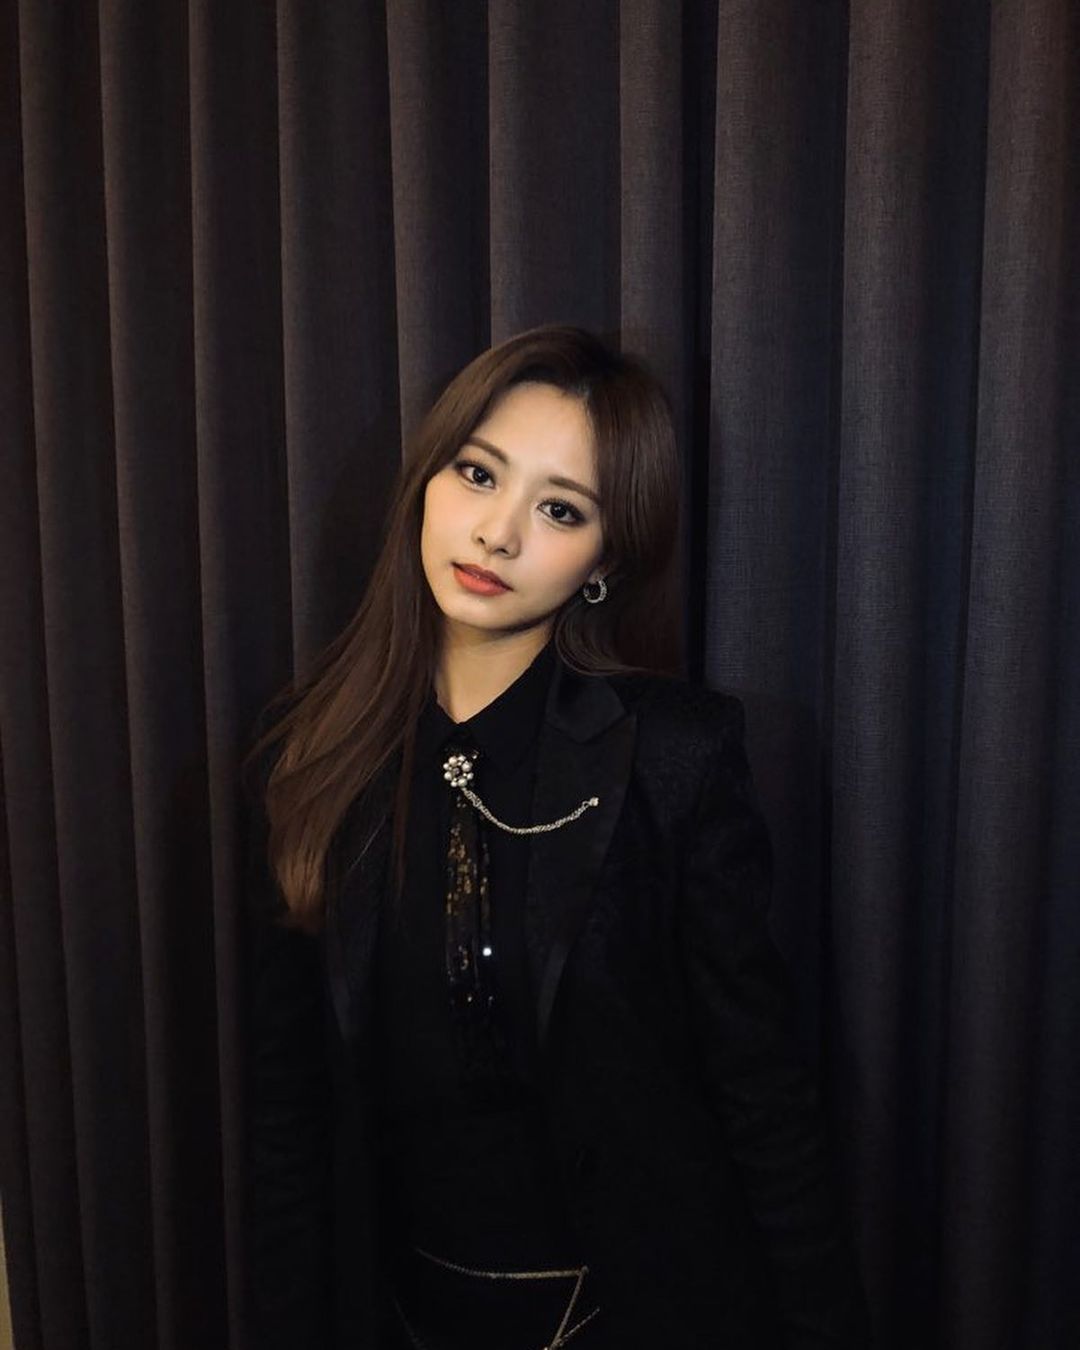 Tzuyu TWICE - Biography, Profile, Facts, and Career